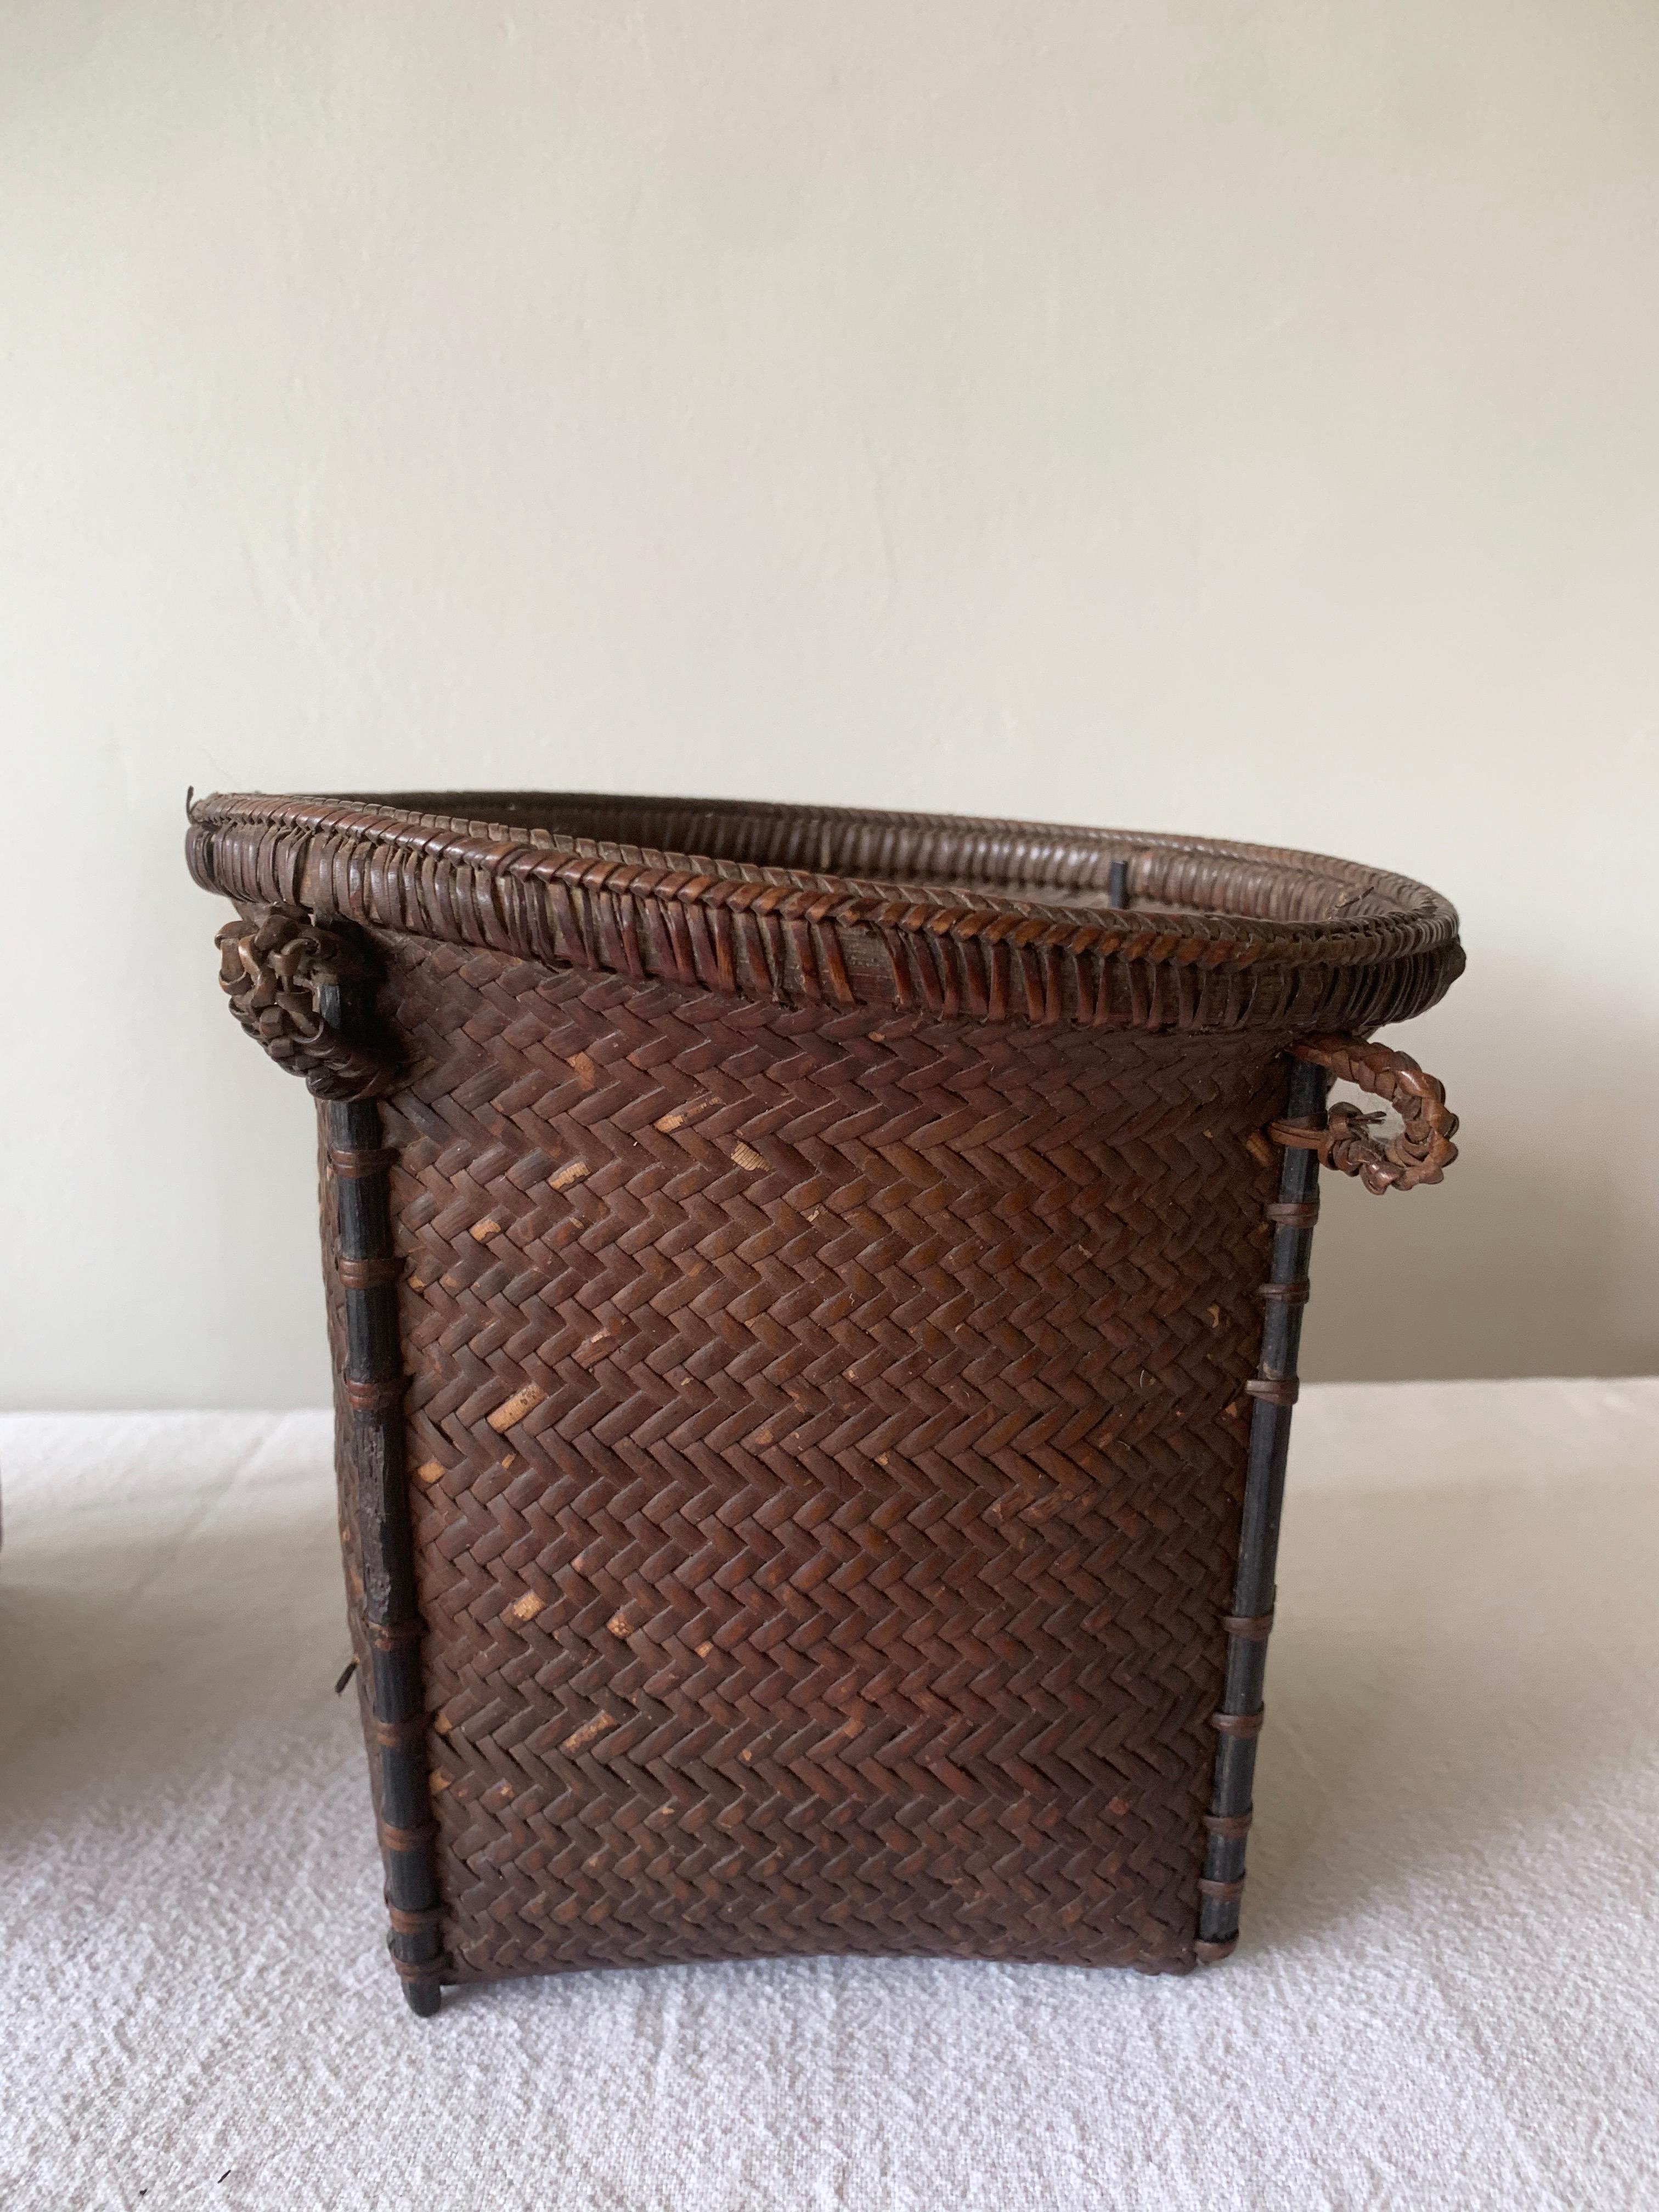 Rattan Basket Dayak Tribe Hand-Woven from Kalimantan, Borneo, Mid 20th Century In Good Condition For Sale In Jimbaran, Bali